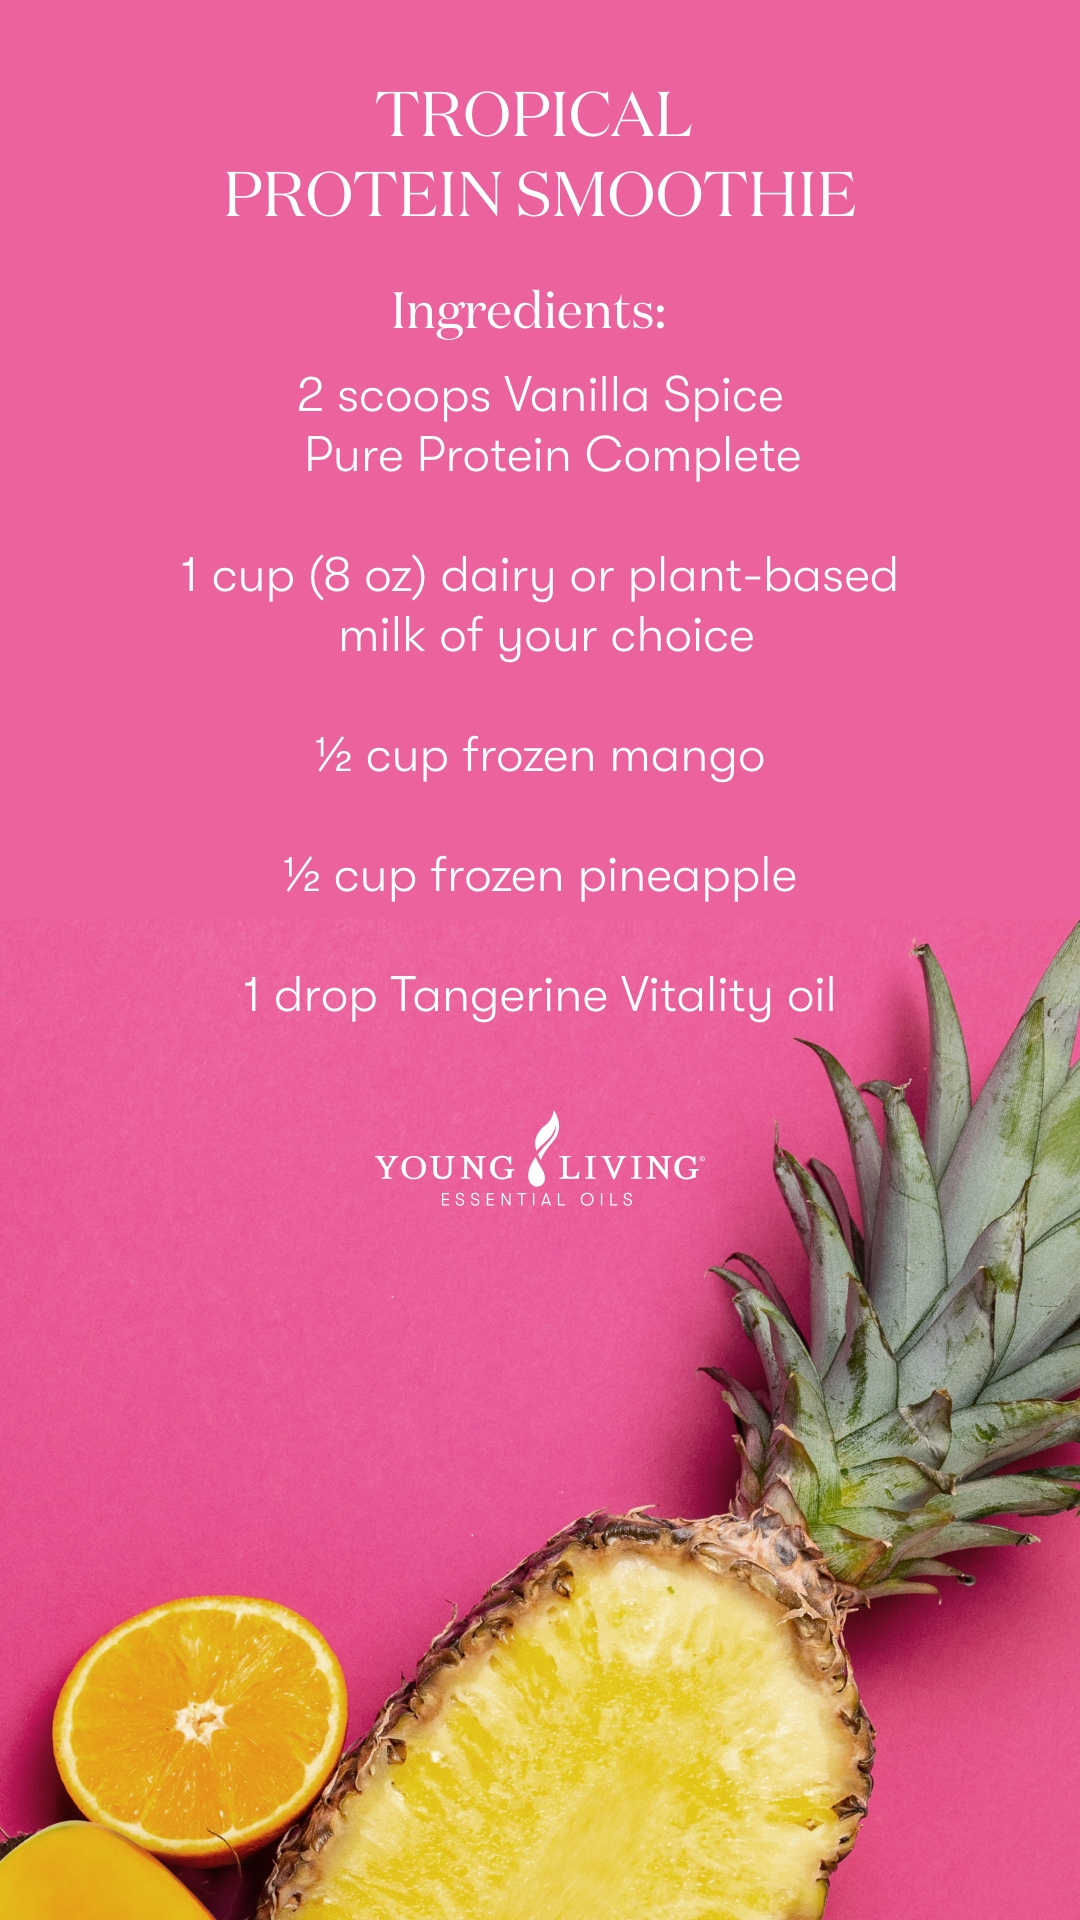 https://www.youngliving.com/blog/wp-content/uploads/2022/07/Blog_Pure-Protein-Complete_Tropical-Protein-Smoothie_US.jpg